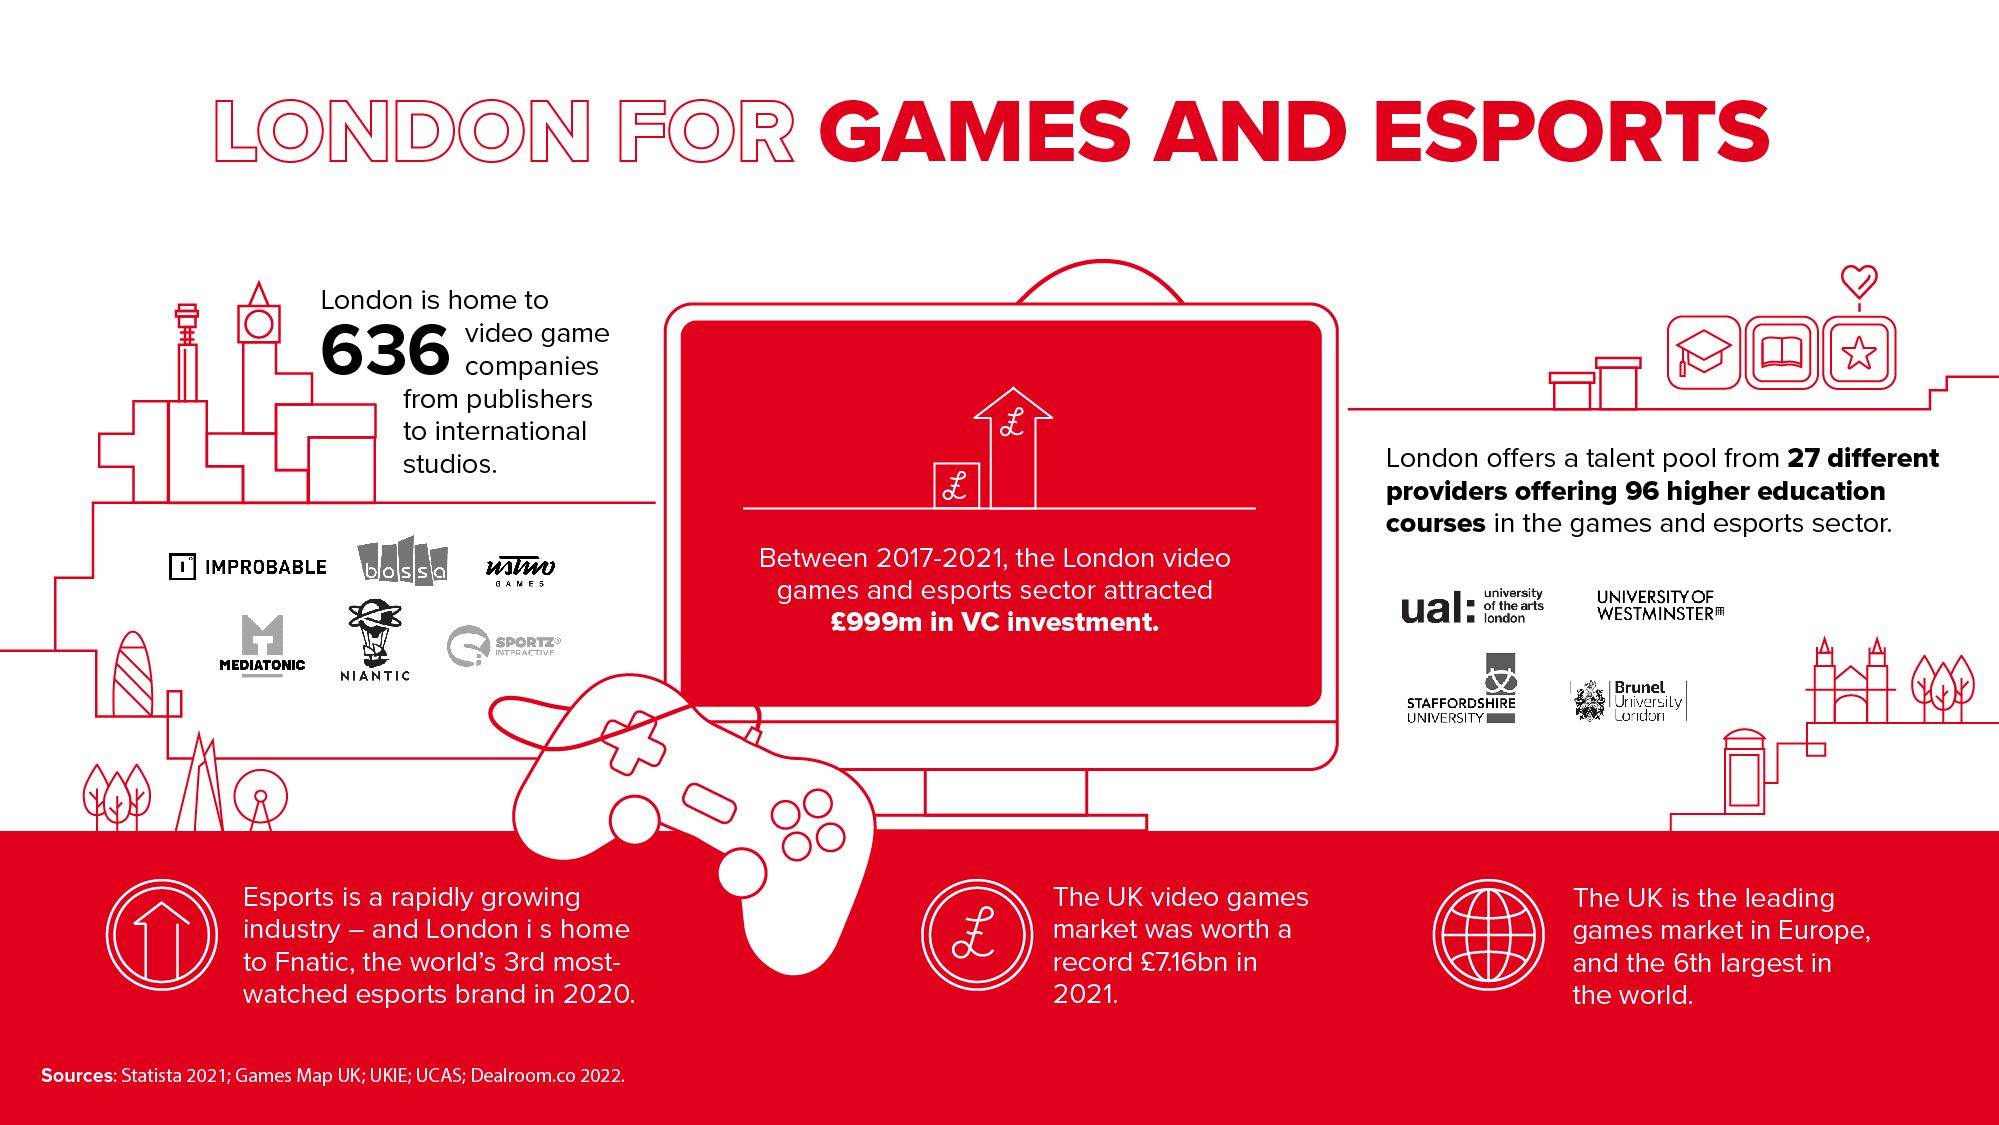 Infographic about games and esports within London.